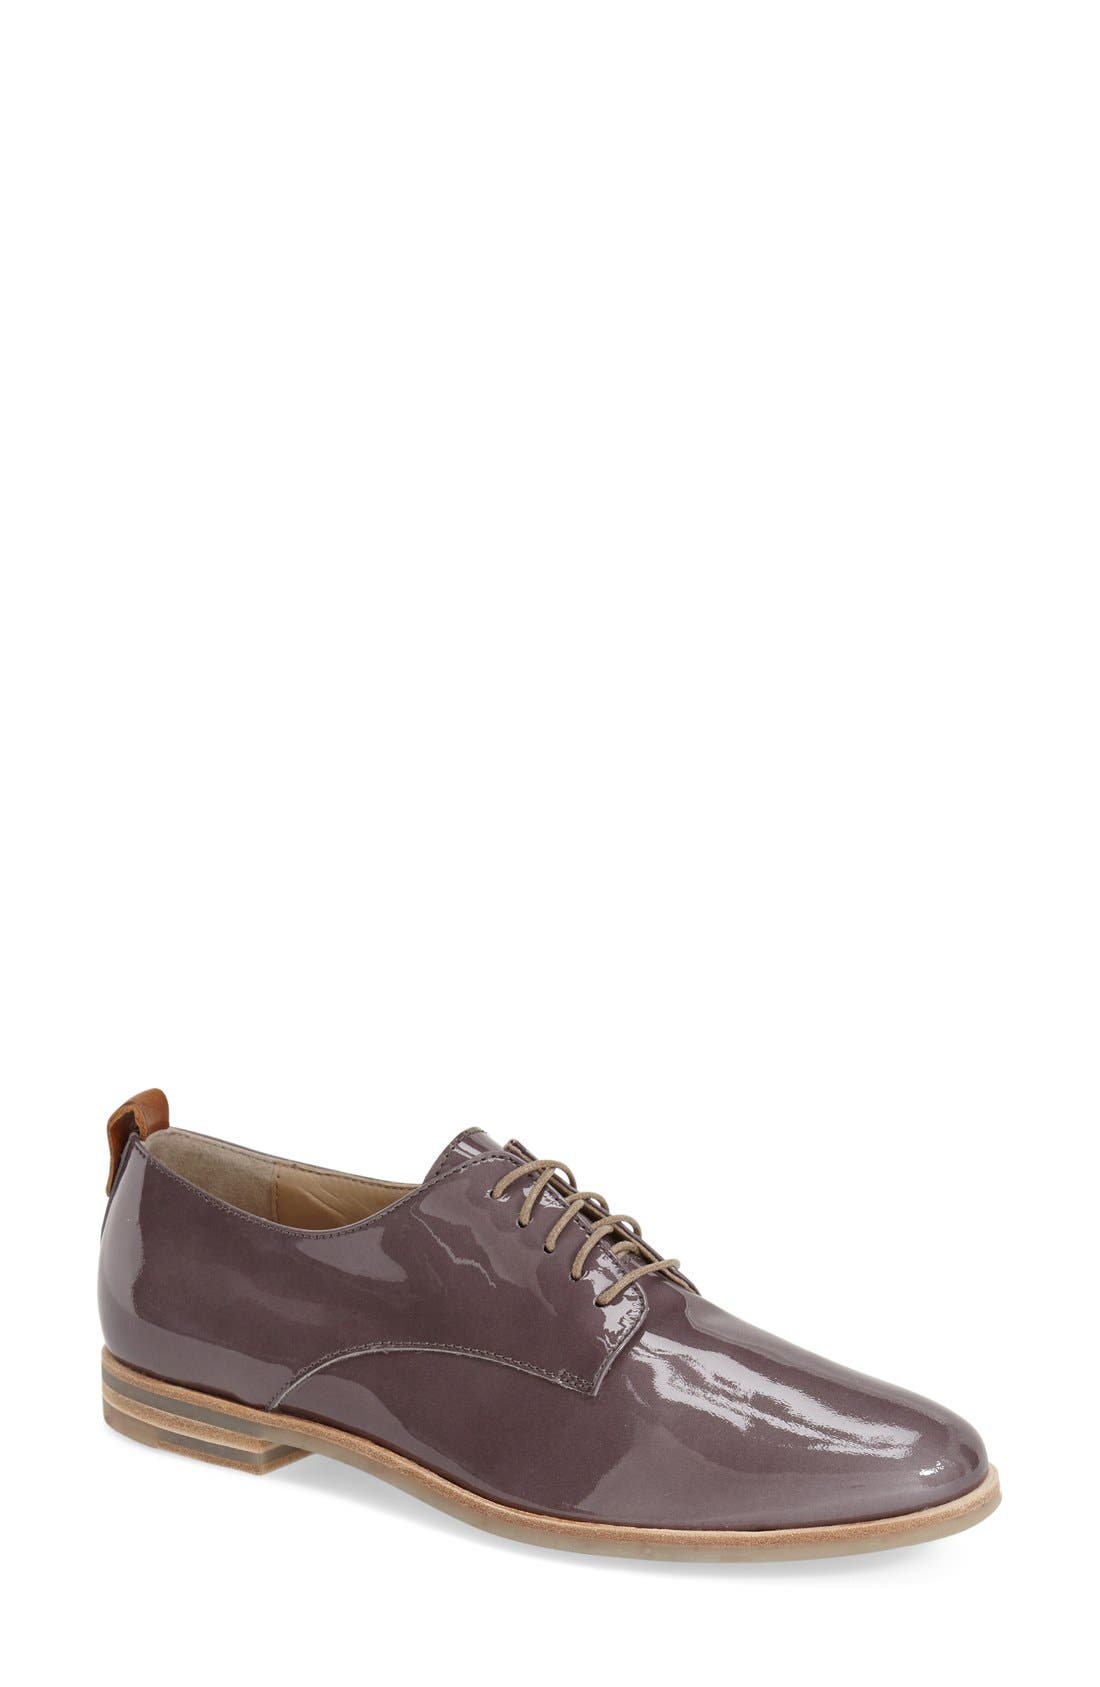 agl patent leather oxfords